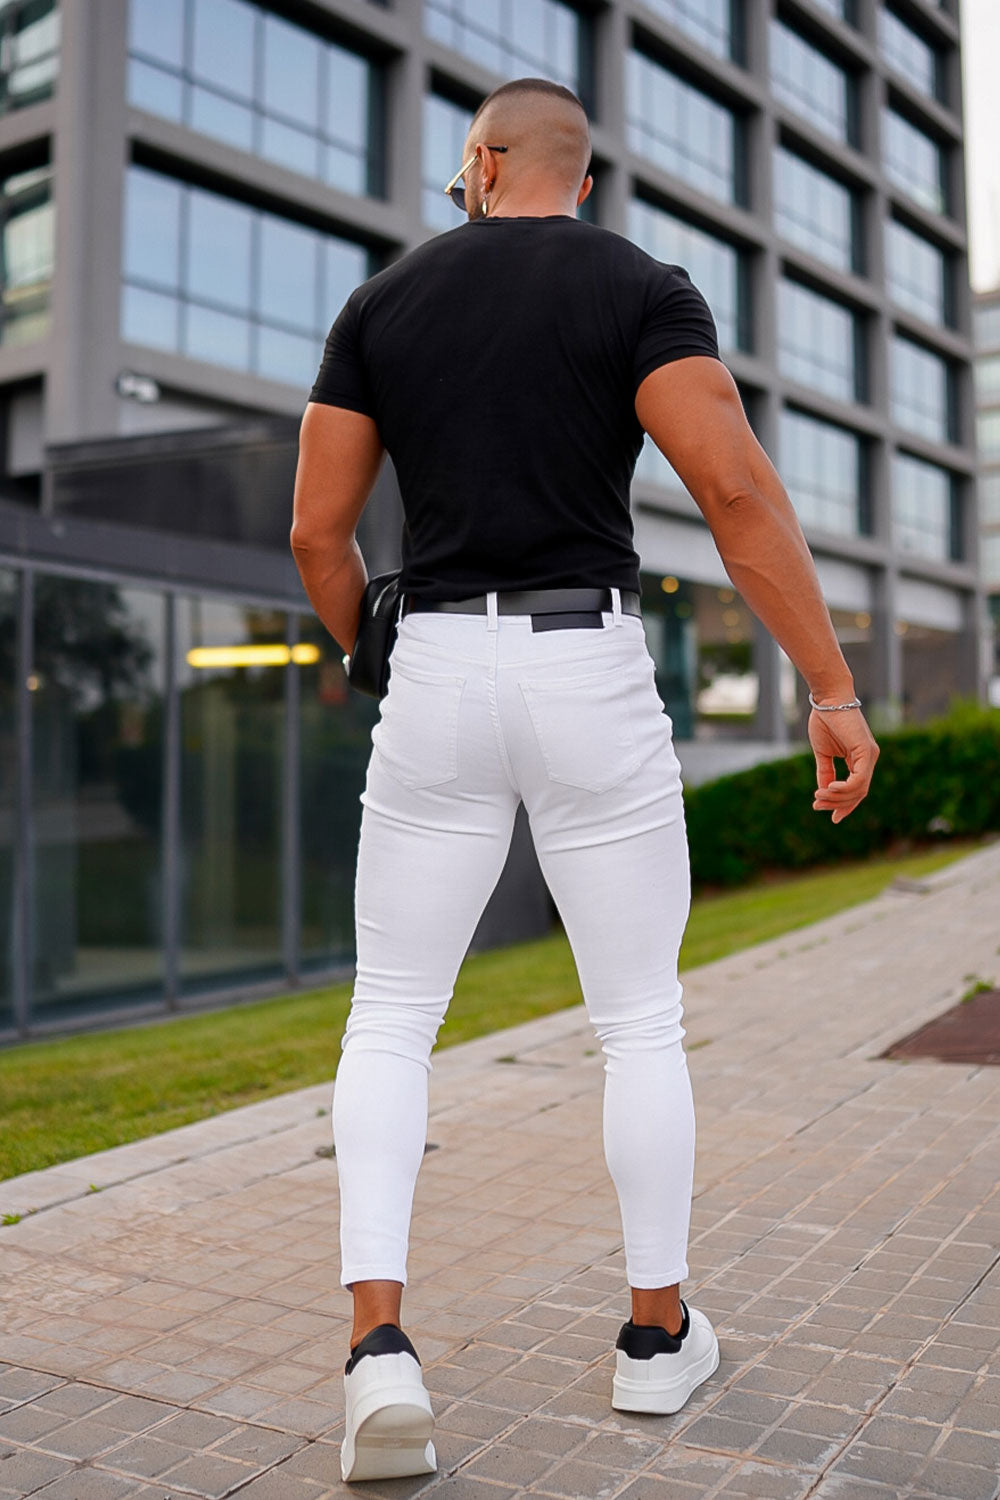 Gingtto Men's Stretch White Jeans: The Perfect Choice for Modern Men